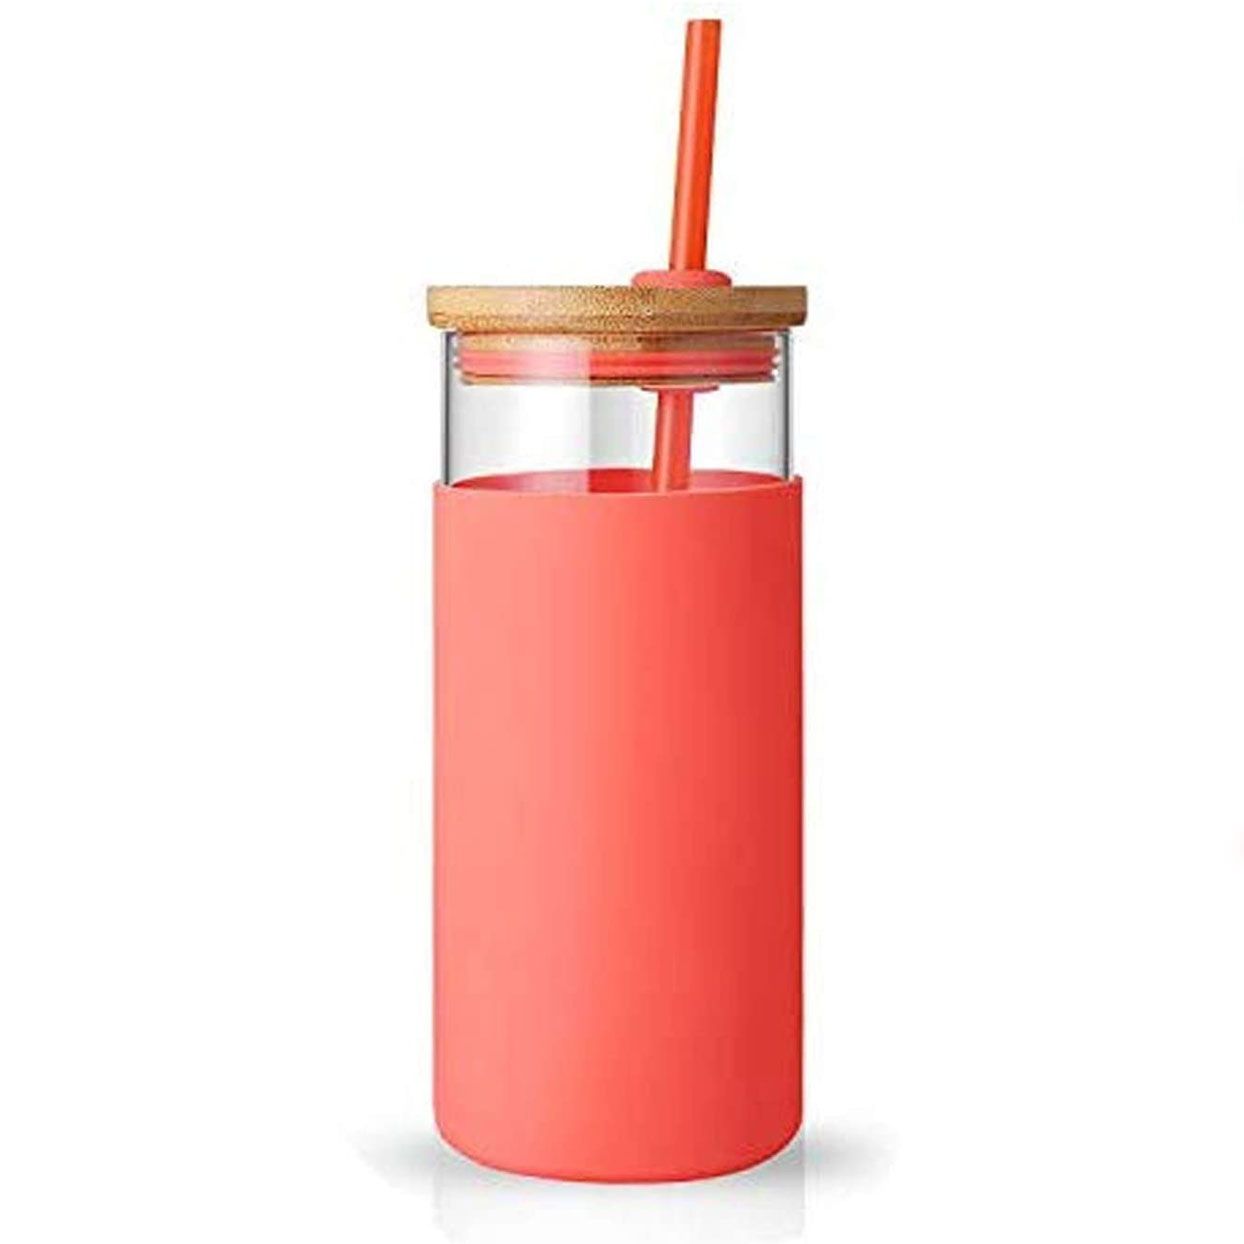 Drinking Cup for Kids,Travel Juice Cup Travel Mug QGYBL192 ONE Day 300ML Glass Water Bottle with Silicone Sleeve and Carrying Loop BPA Free